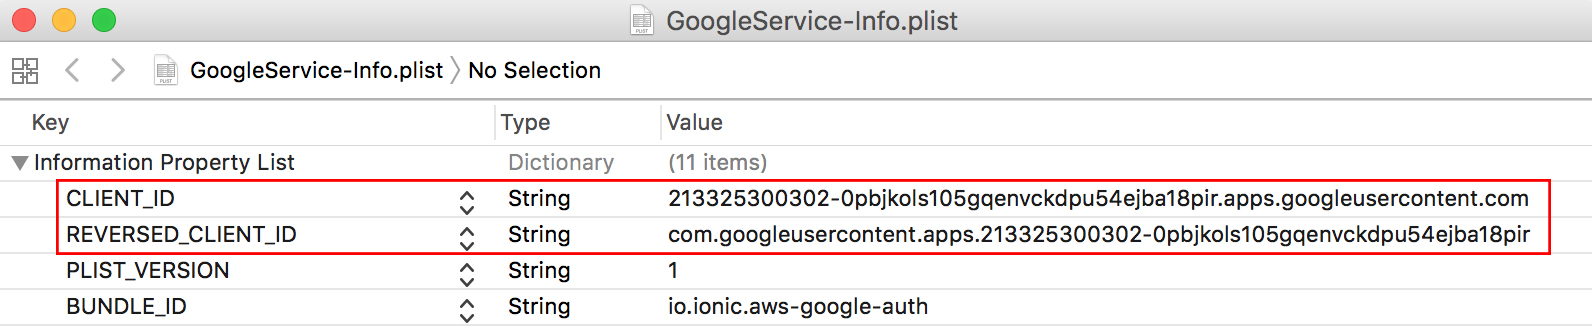 ionic AWS Google oauth client id and reverse id